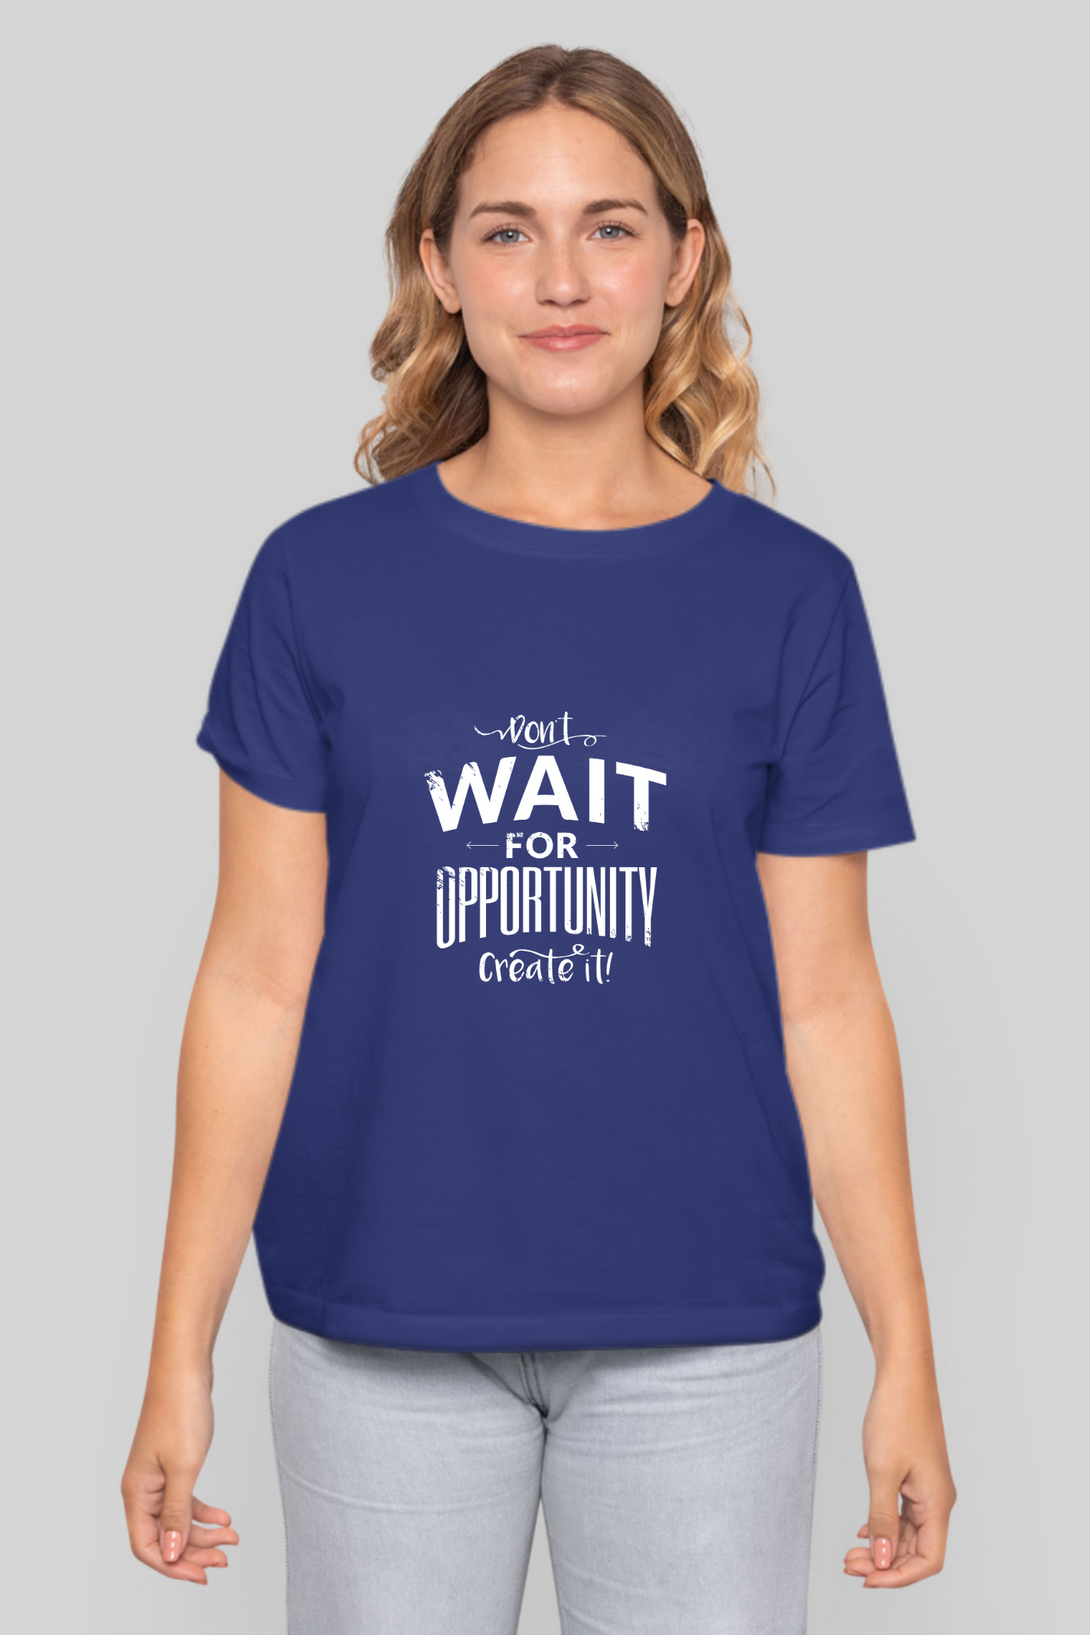 Create Opportunity Printed T-Shirt For Women - WowWaves - 13